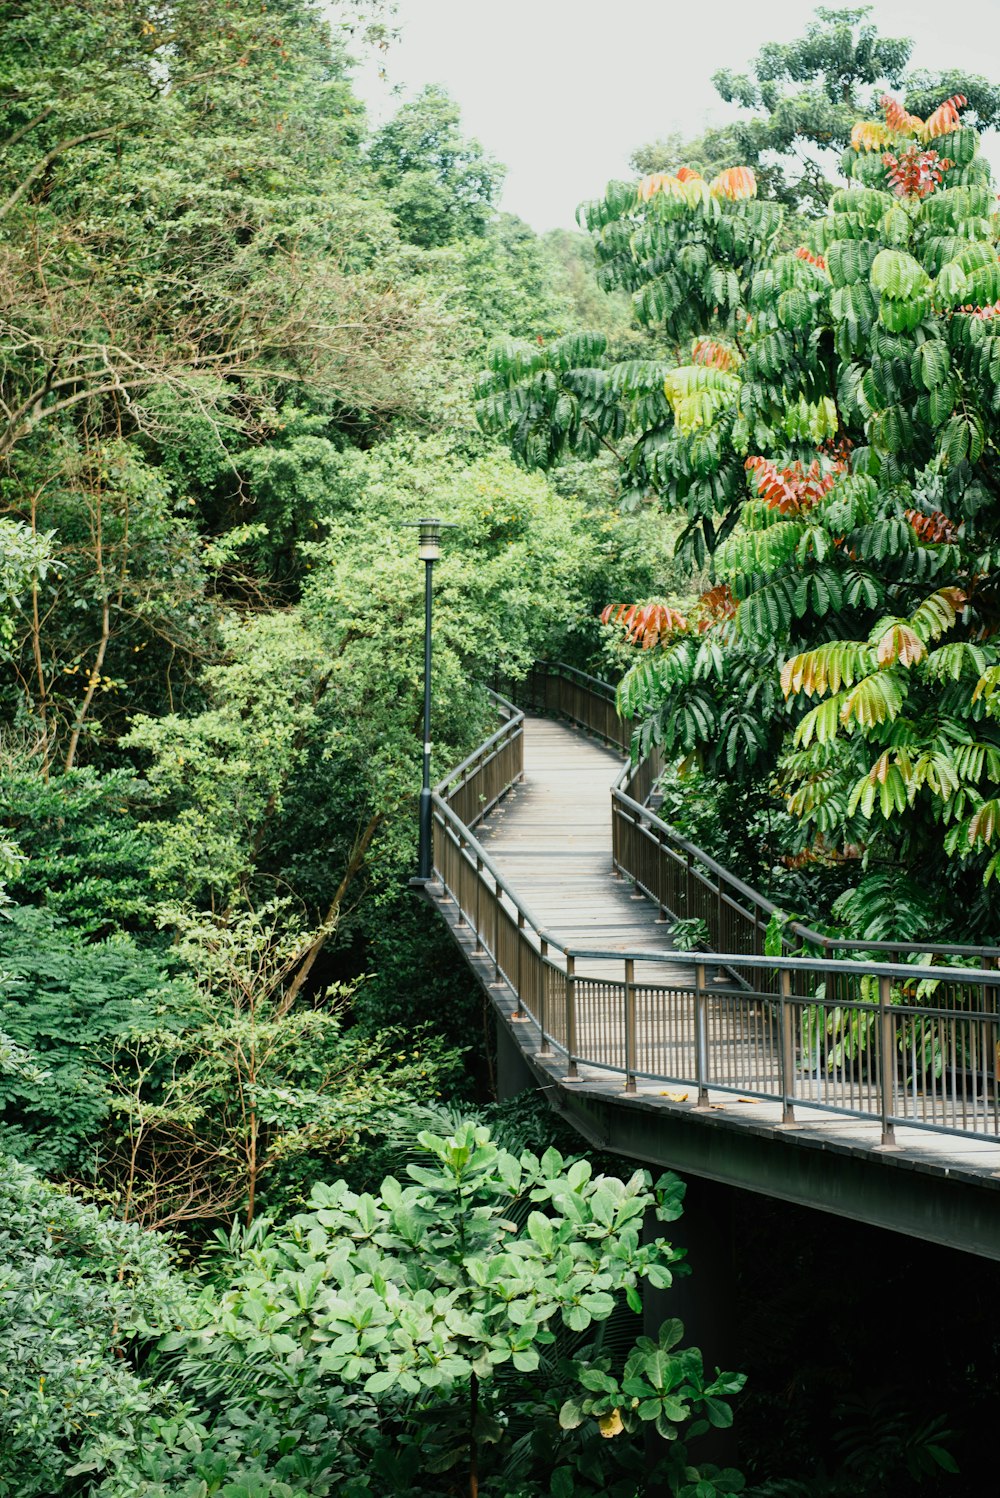 winding wooden walk bridge lined with trees